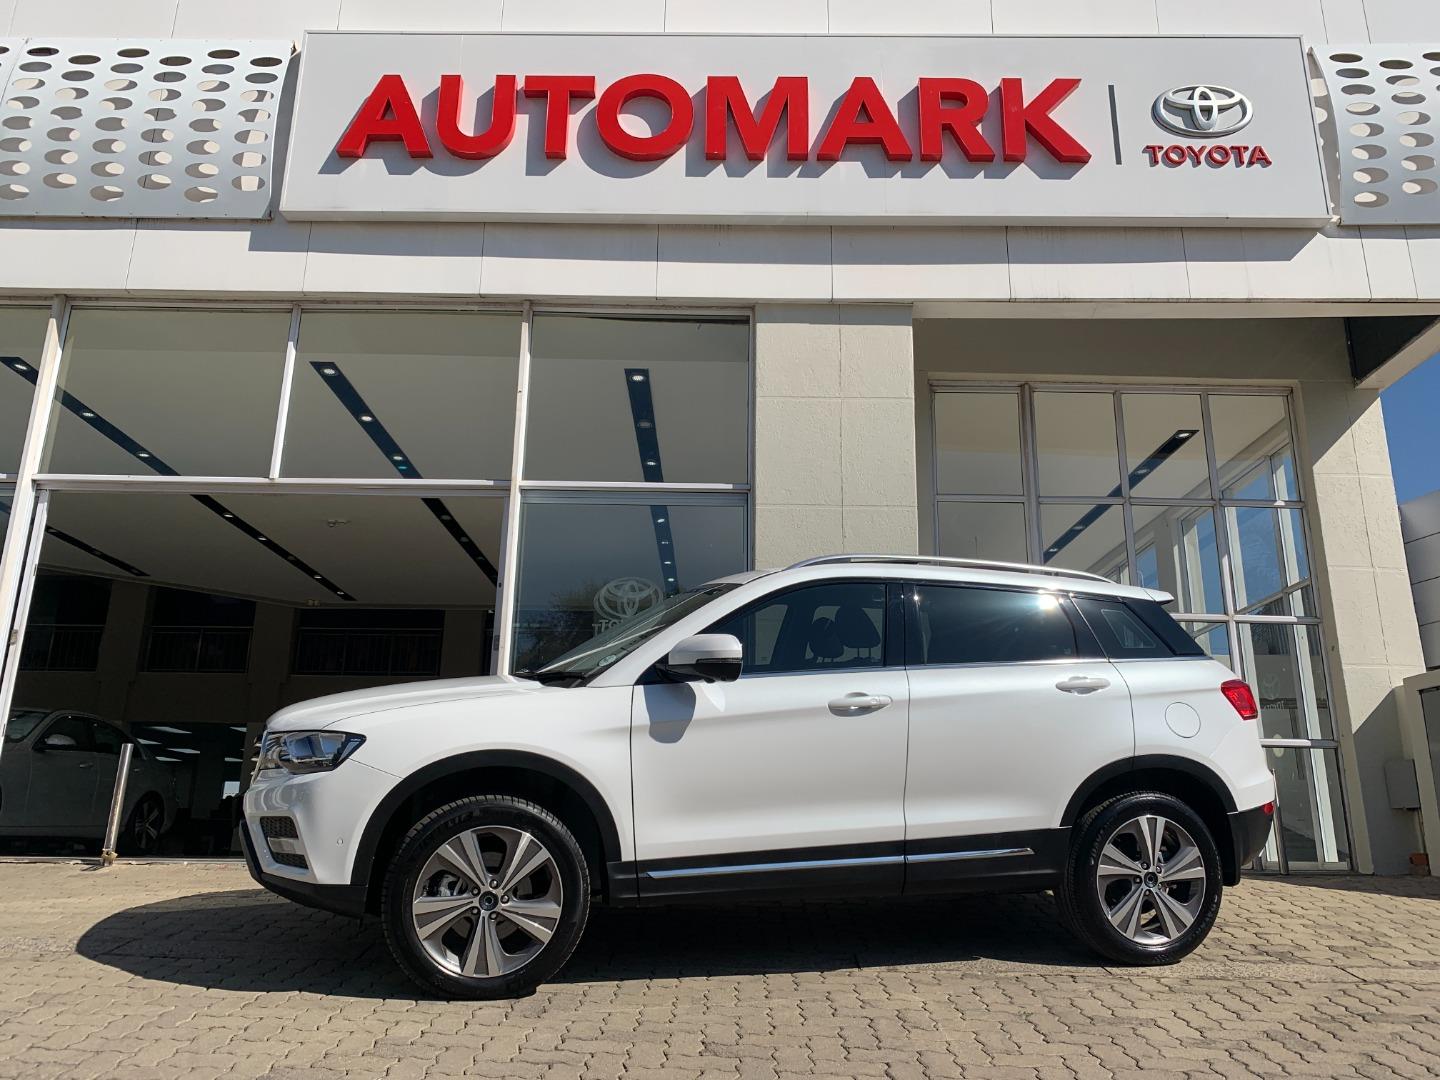 2021 Haval H6 My21 2.0T Luxury 2wd Dct for sale - 342603